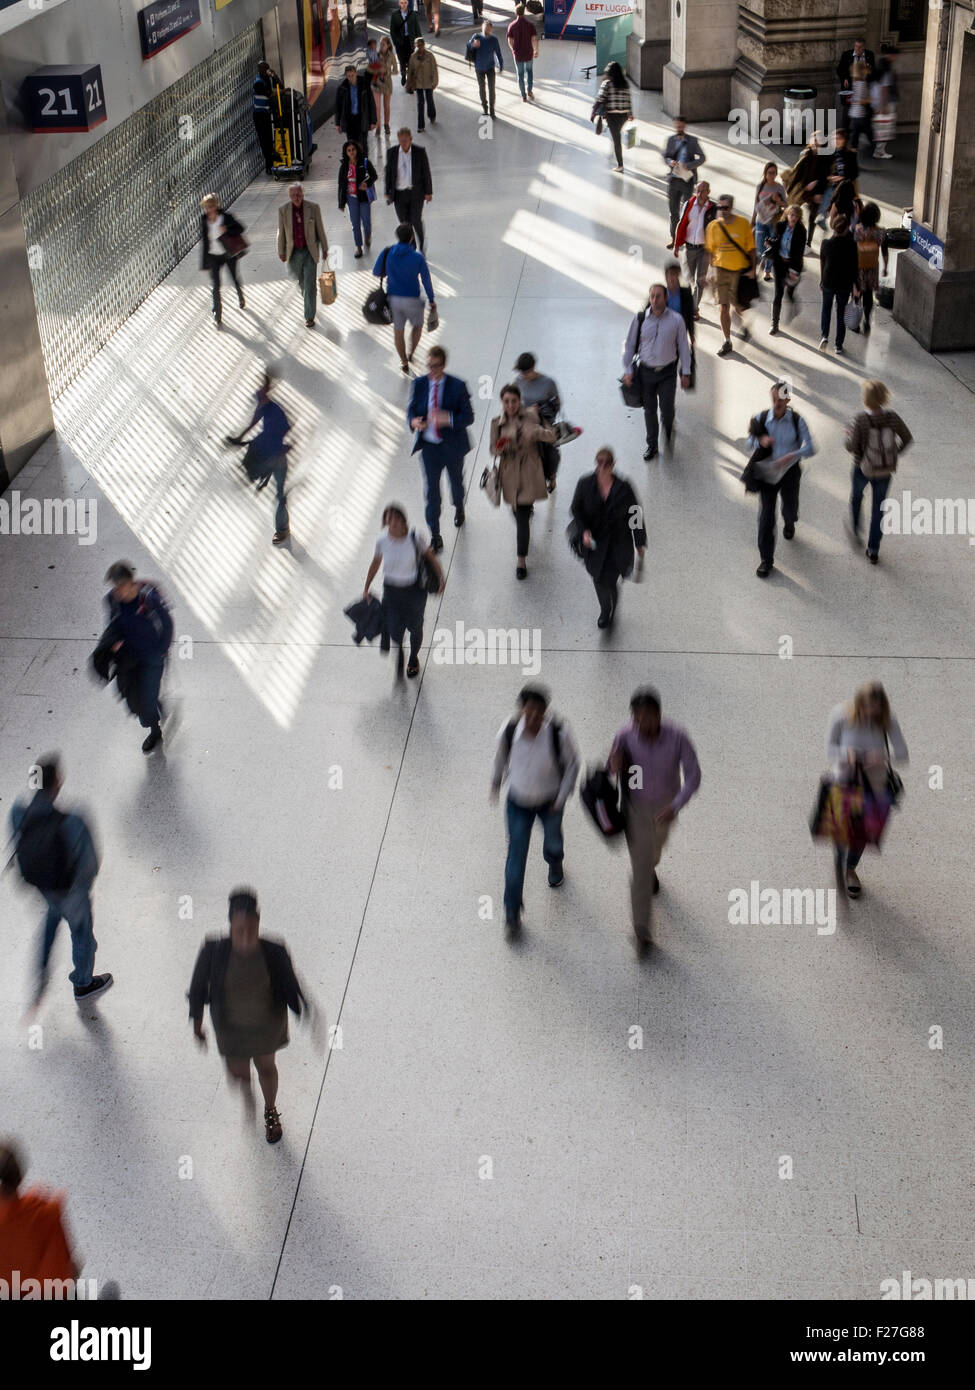 Crowds of people rushing to get home from work after a long day at work Stock Photo